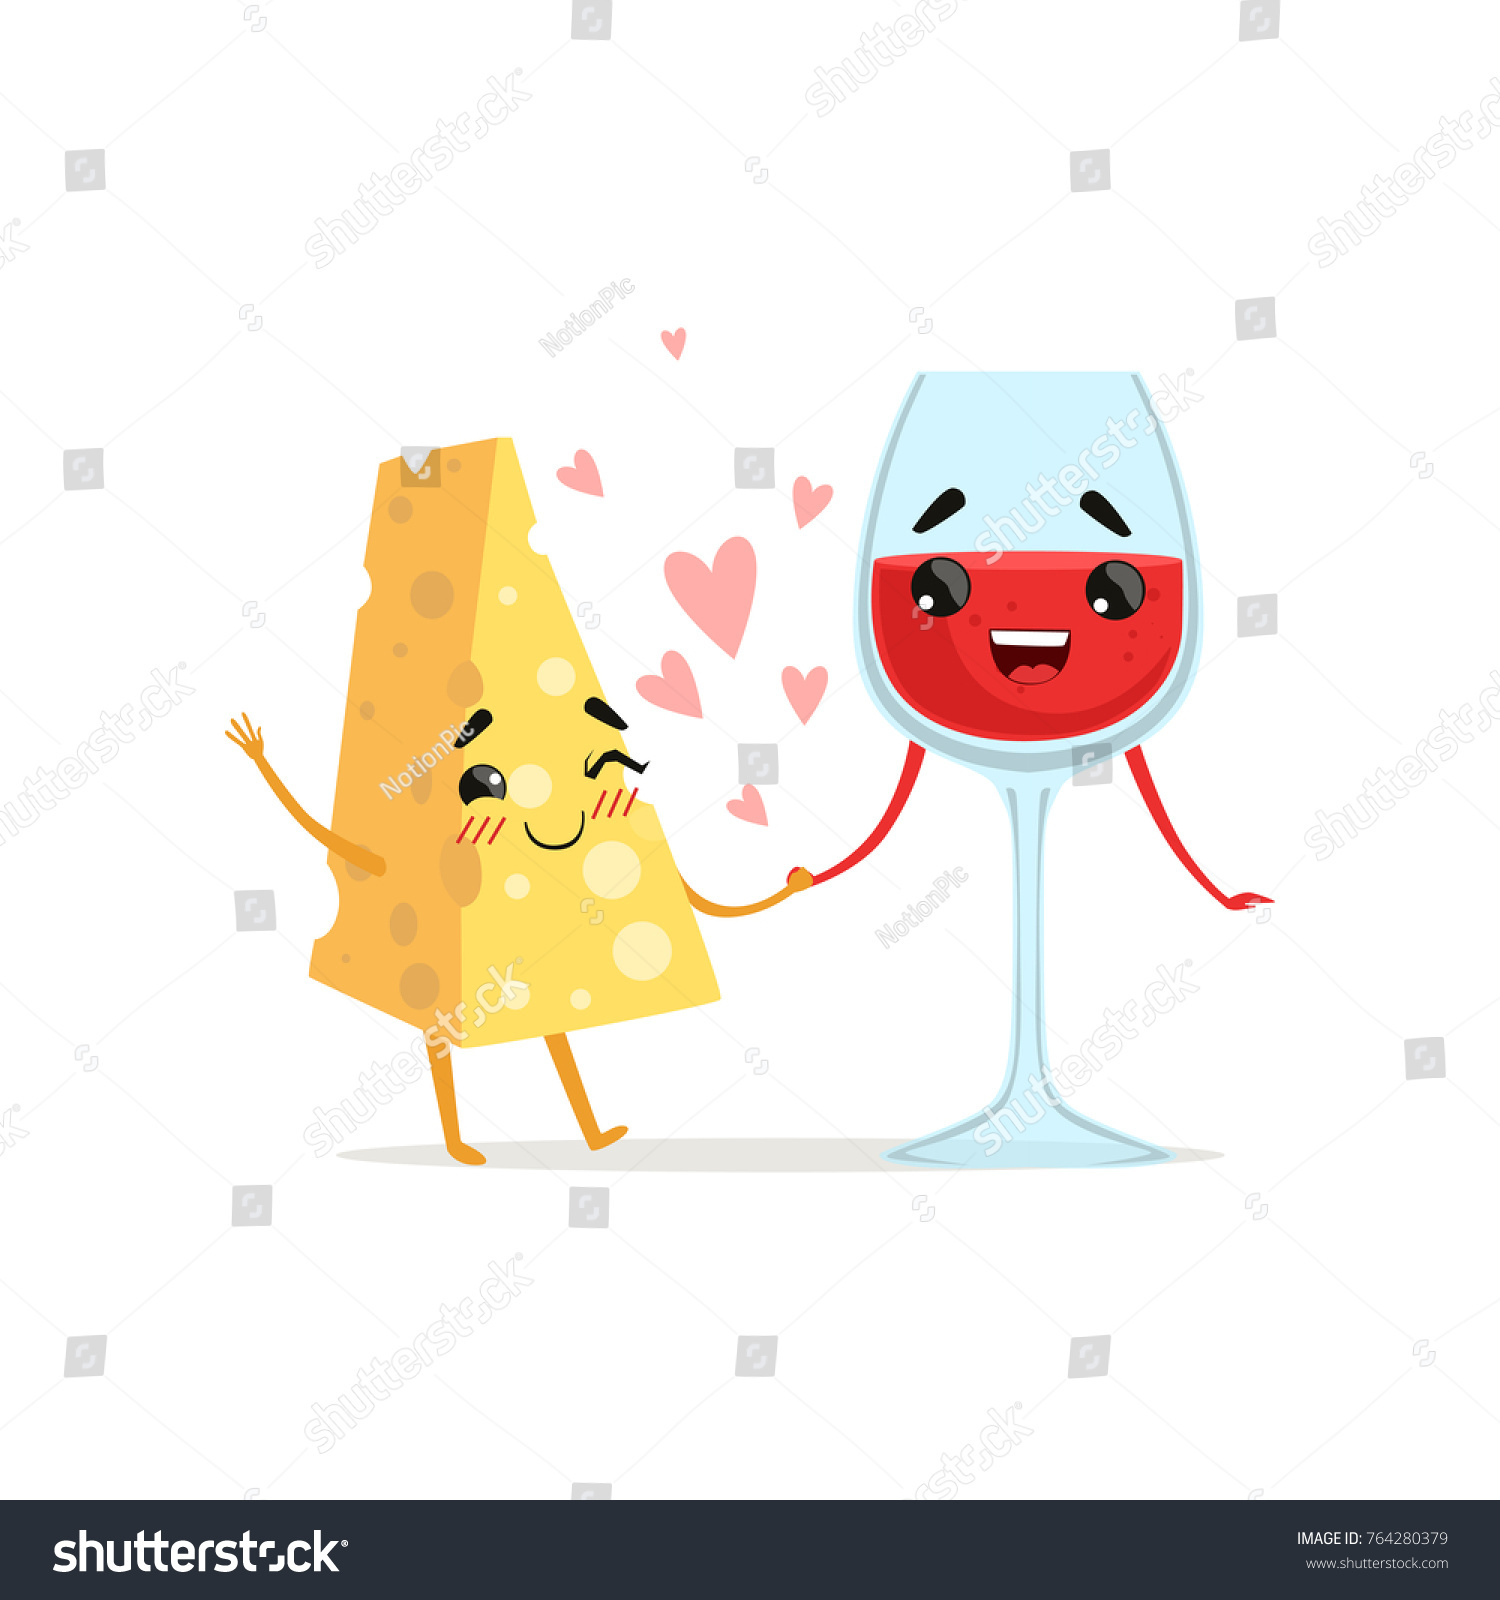 SVG of Smiling cheese and glass of red wine holding by hands. Couple in love. Food and drink concept. Vector illustration characters in flat style svg